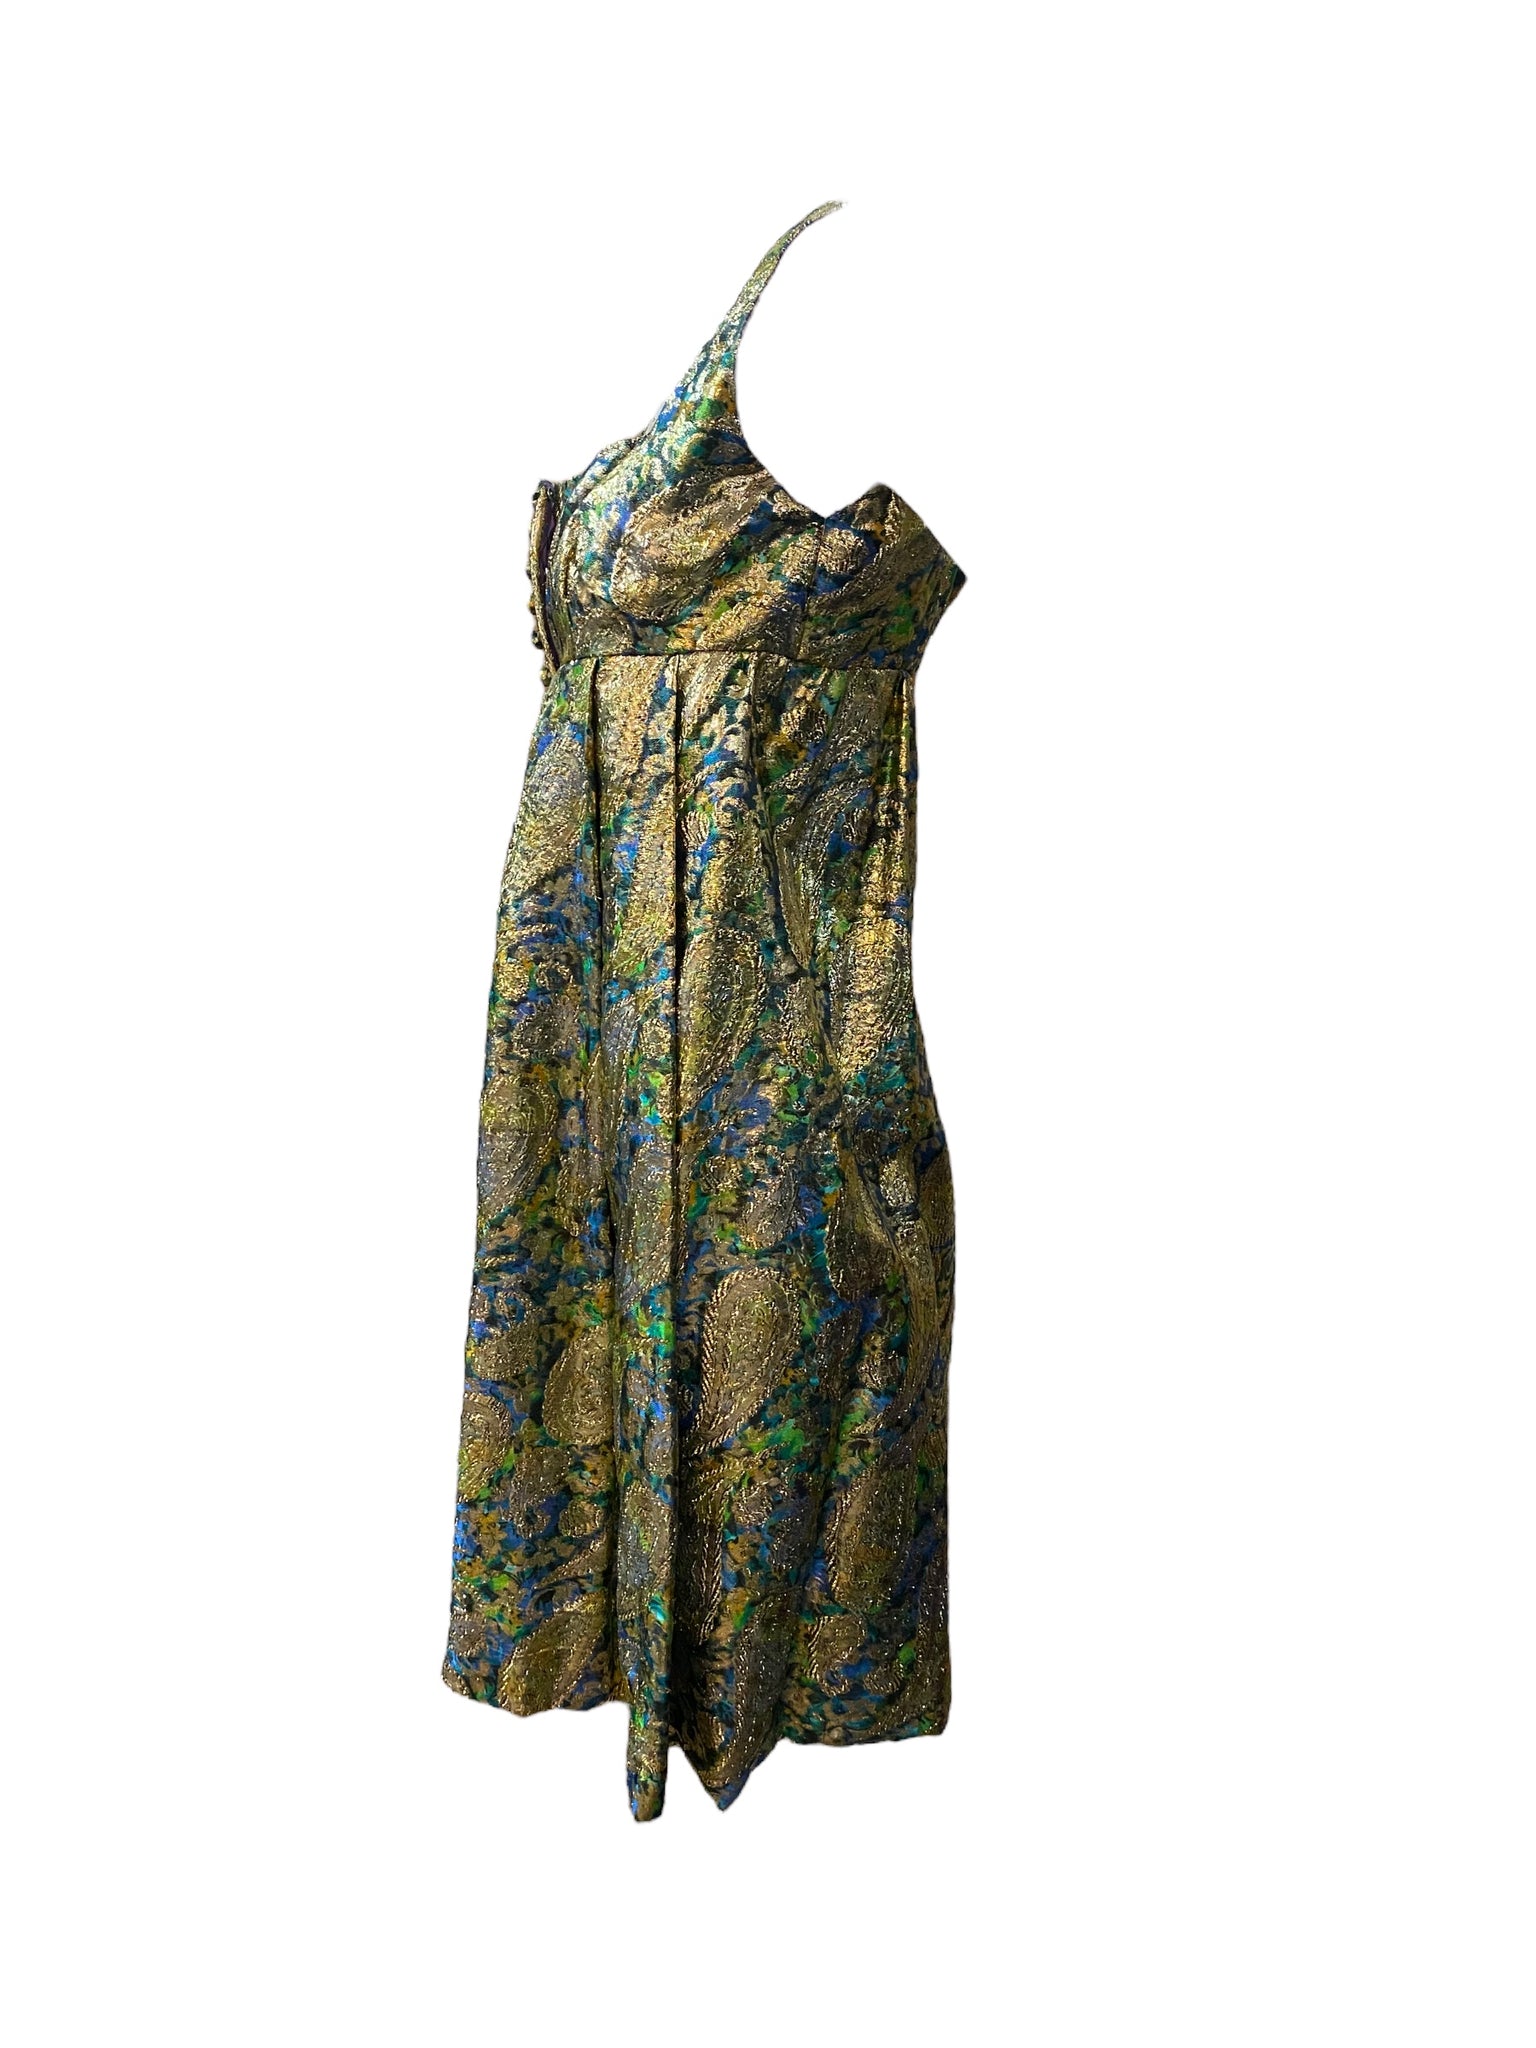 Saks Fifth Avenue 60s Psychedelic  Gold Lame Paisley Mini Dress SIDE 2 of 6